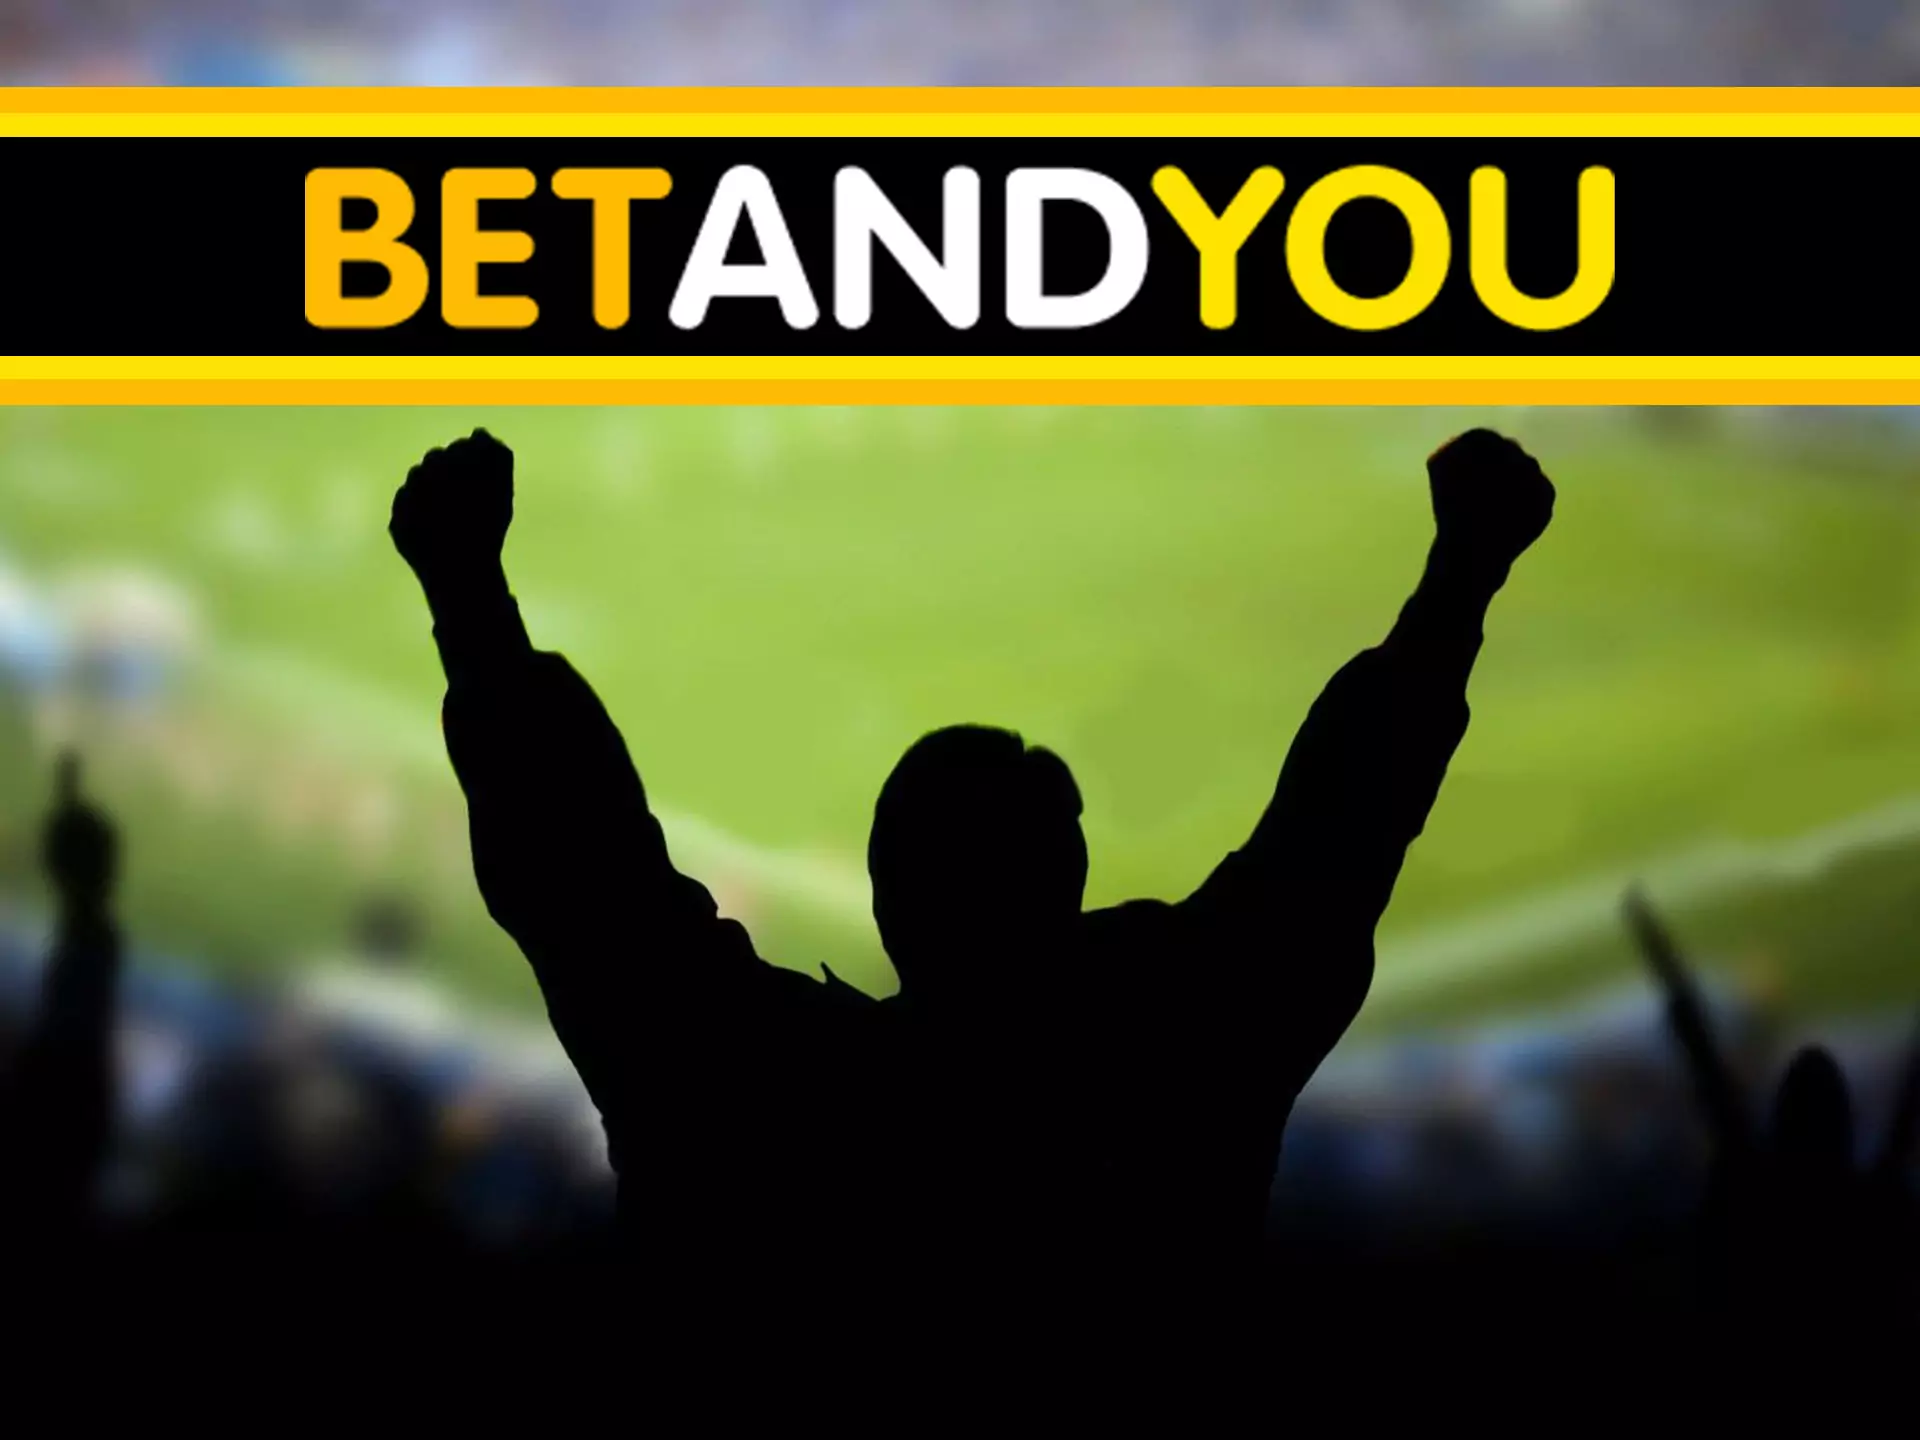 The Betandyou app is great for online sports betting.